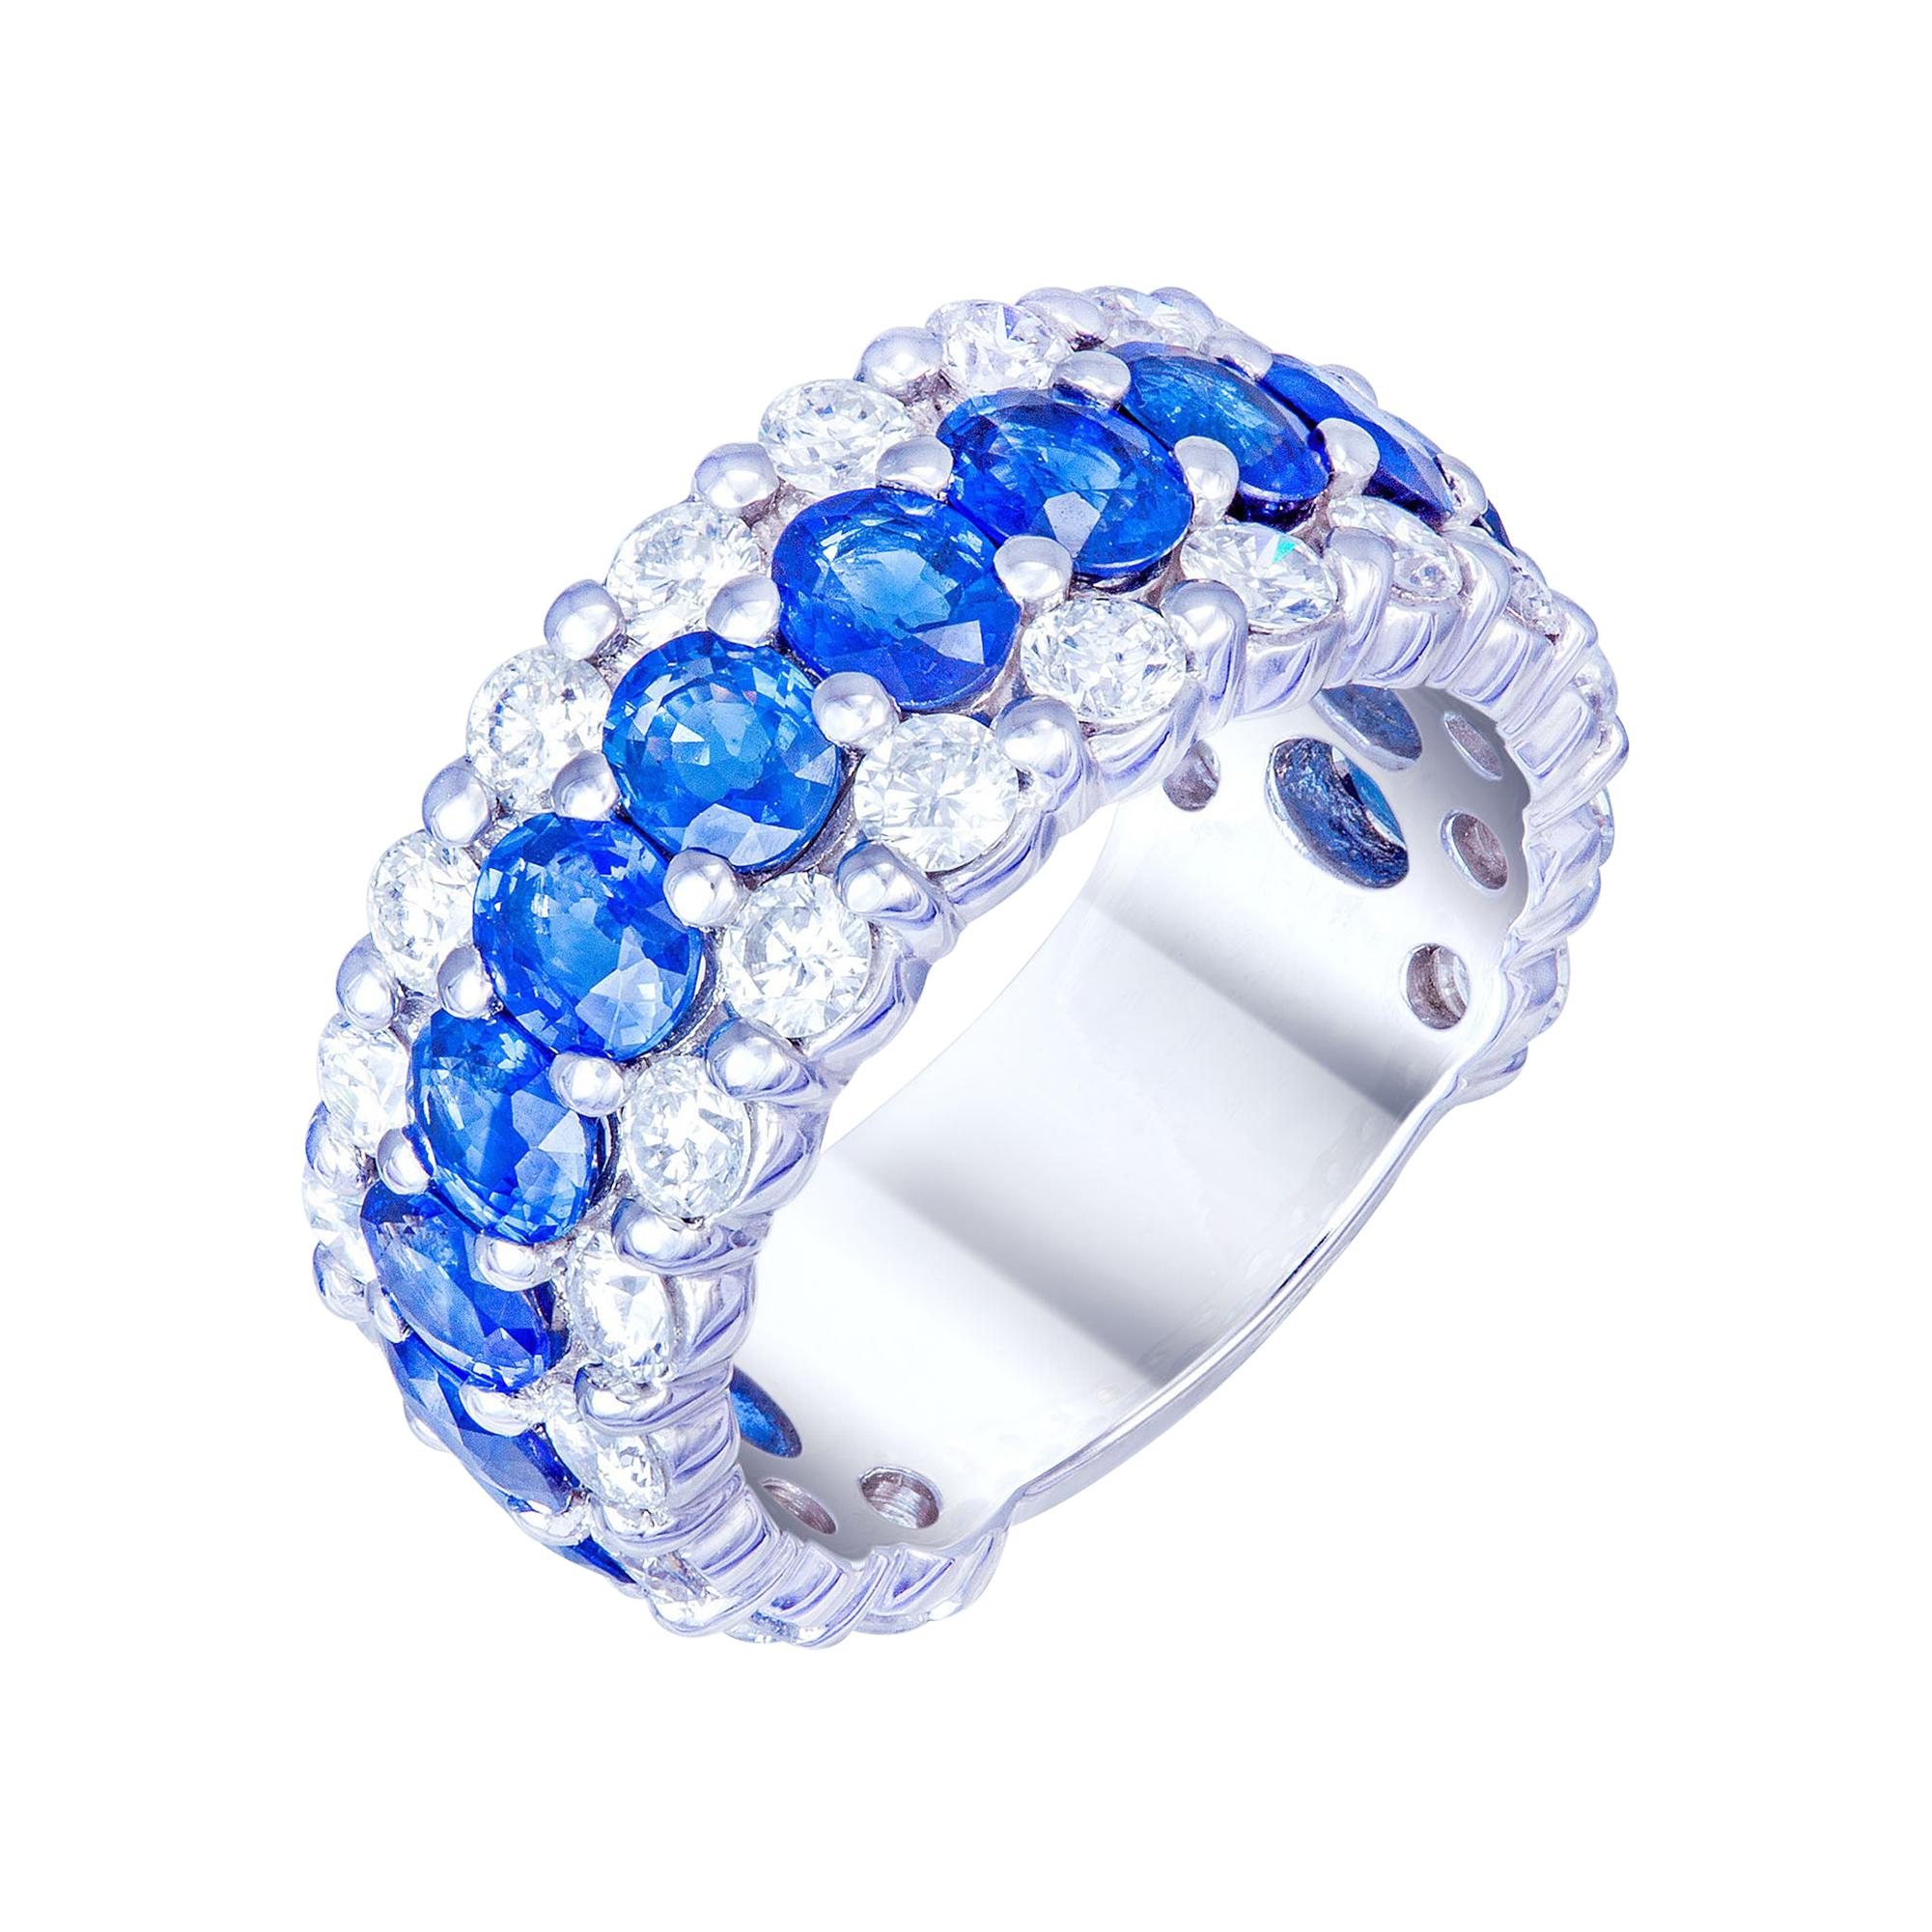 The Classic Blue Sapphire White Diamond White Gold Band Ring for Her 18k